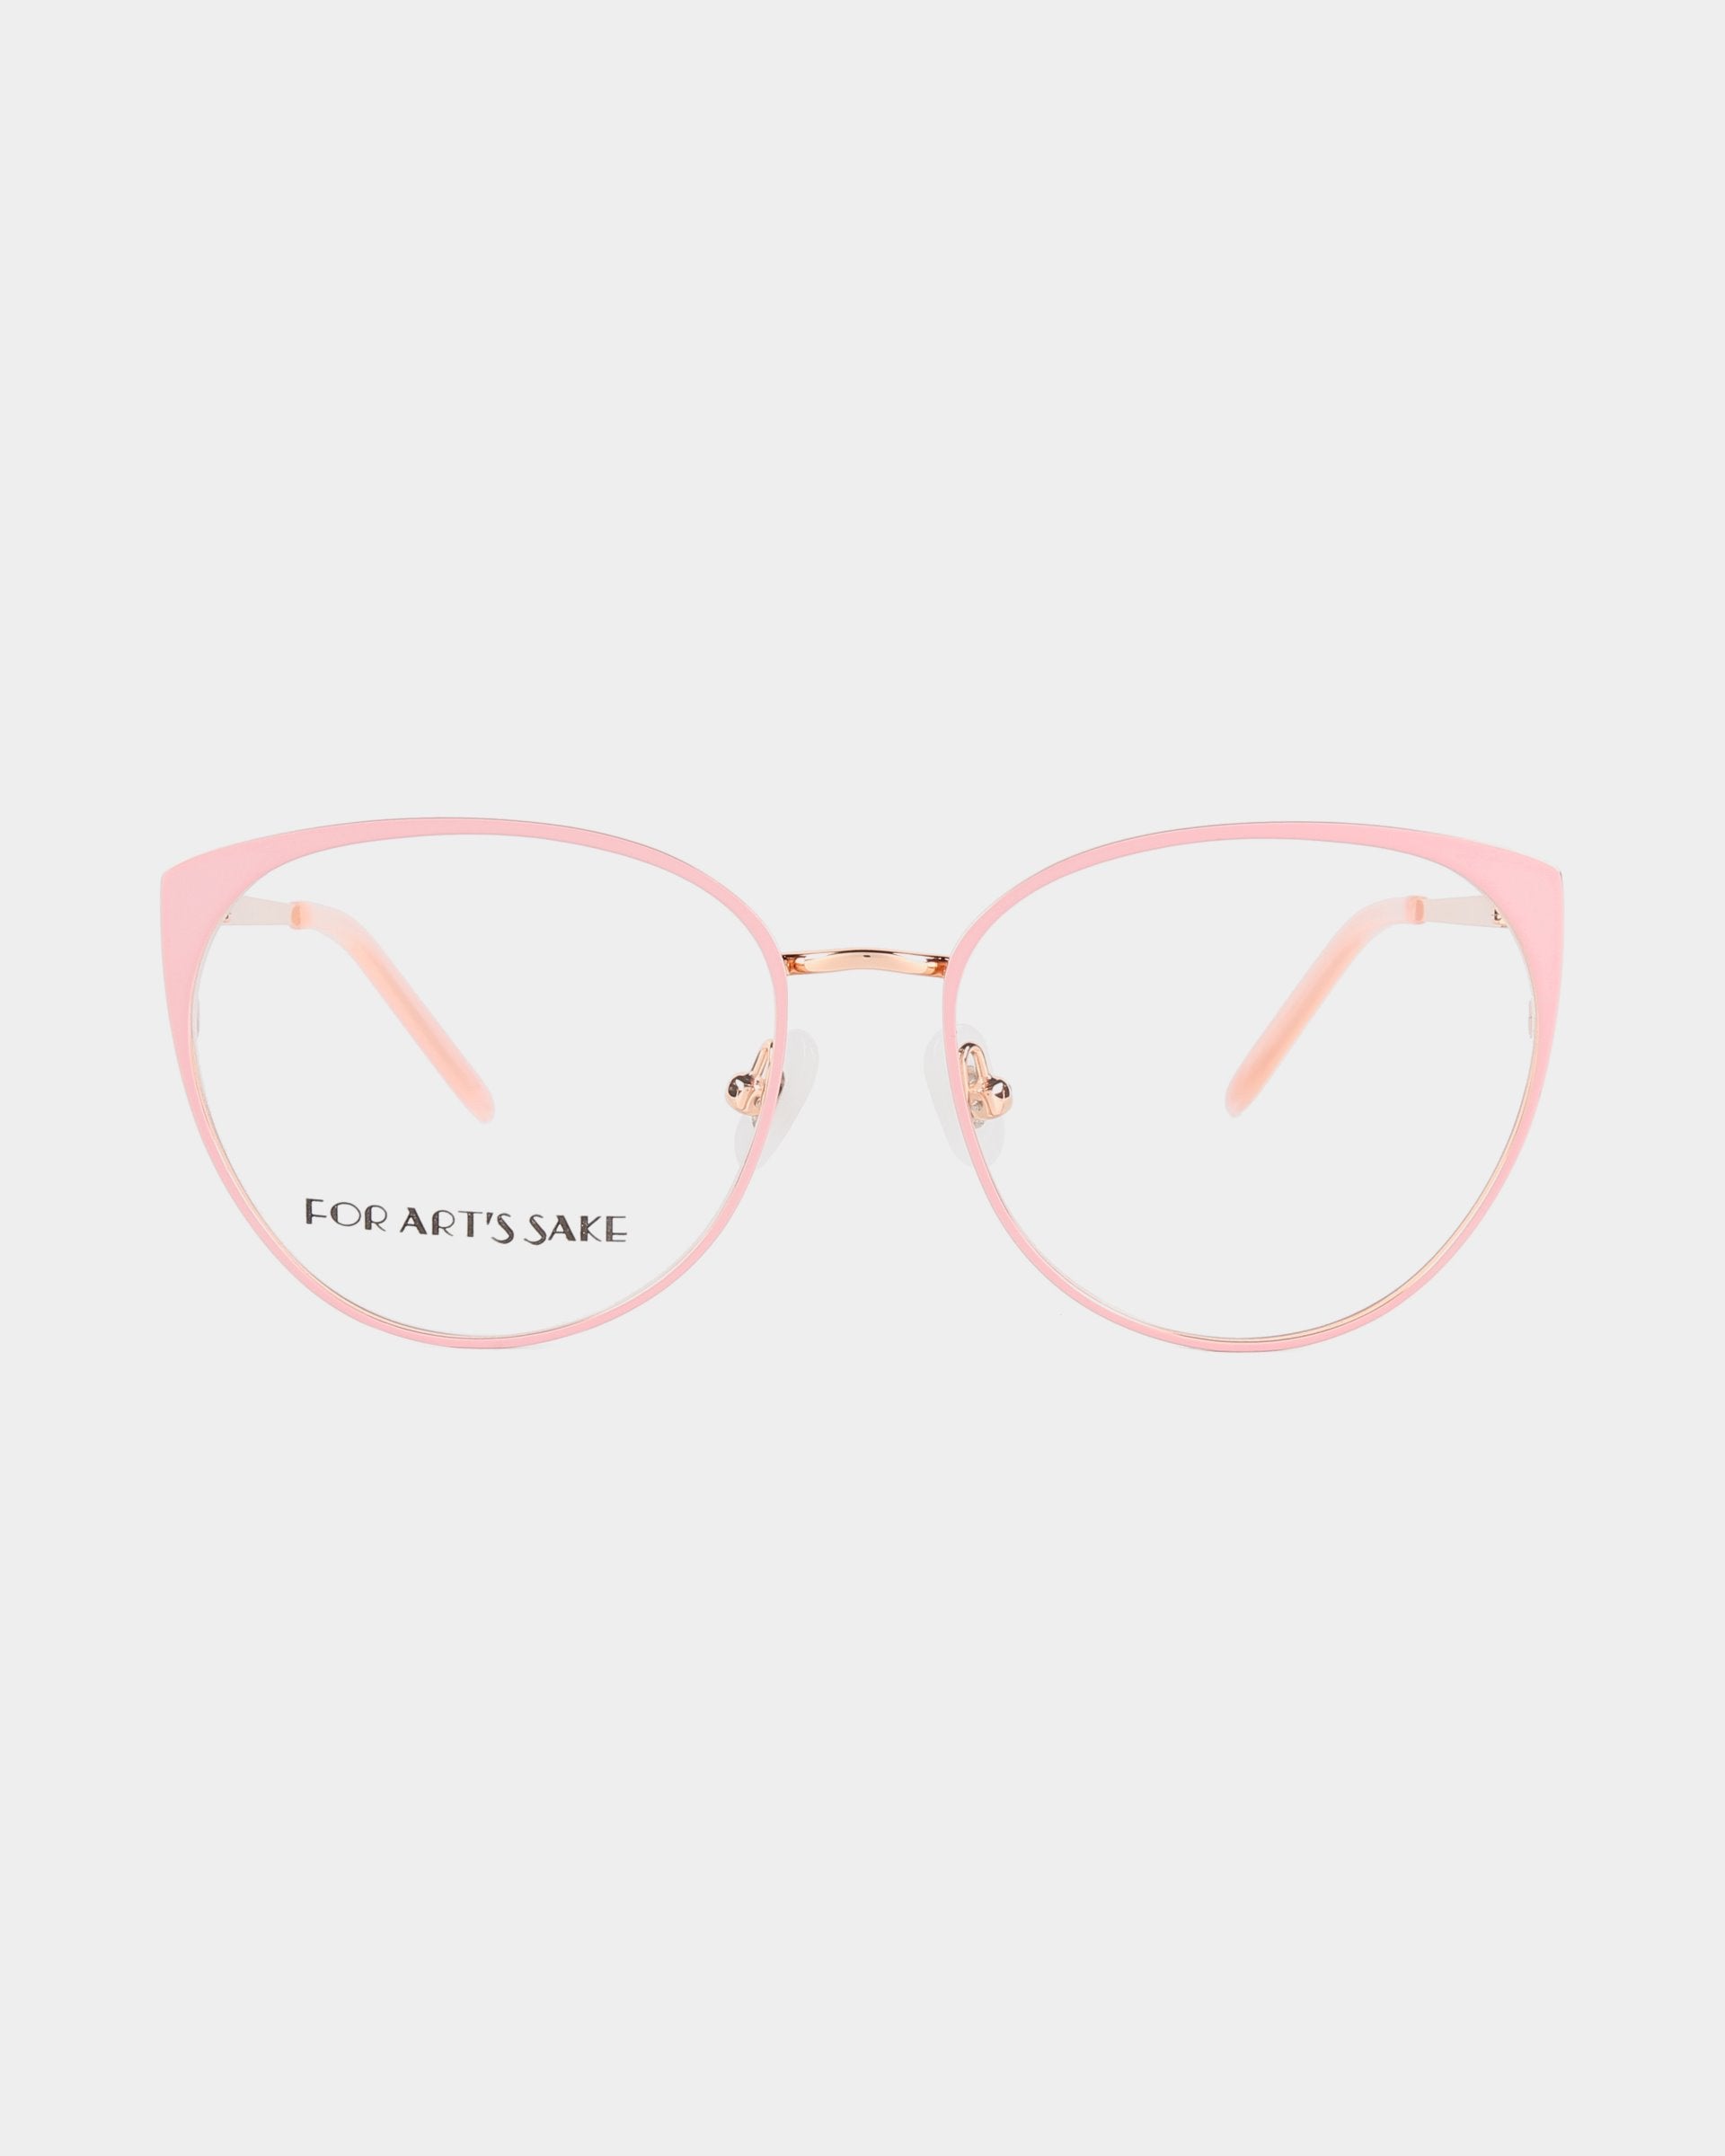 A pair of pink cat-eye glasses with clear lenses and a thin gold nose bridge featuring 18-karat gold plating. The inner arms are light pink, and the left lens has "For Art's Sake®" written in black text. The Kaia glasses, which also offer a blue light filter, are set against a plain white background.